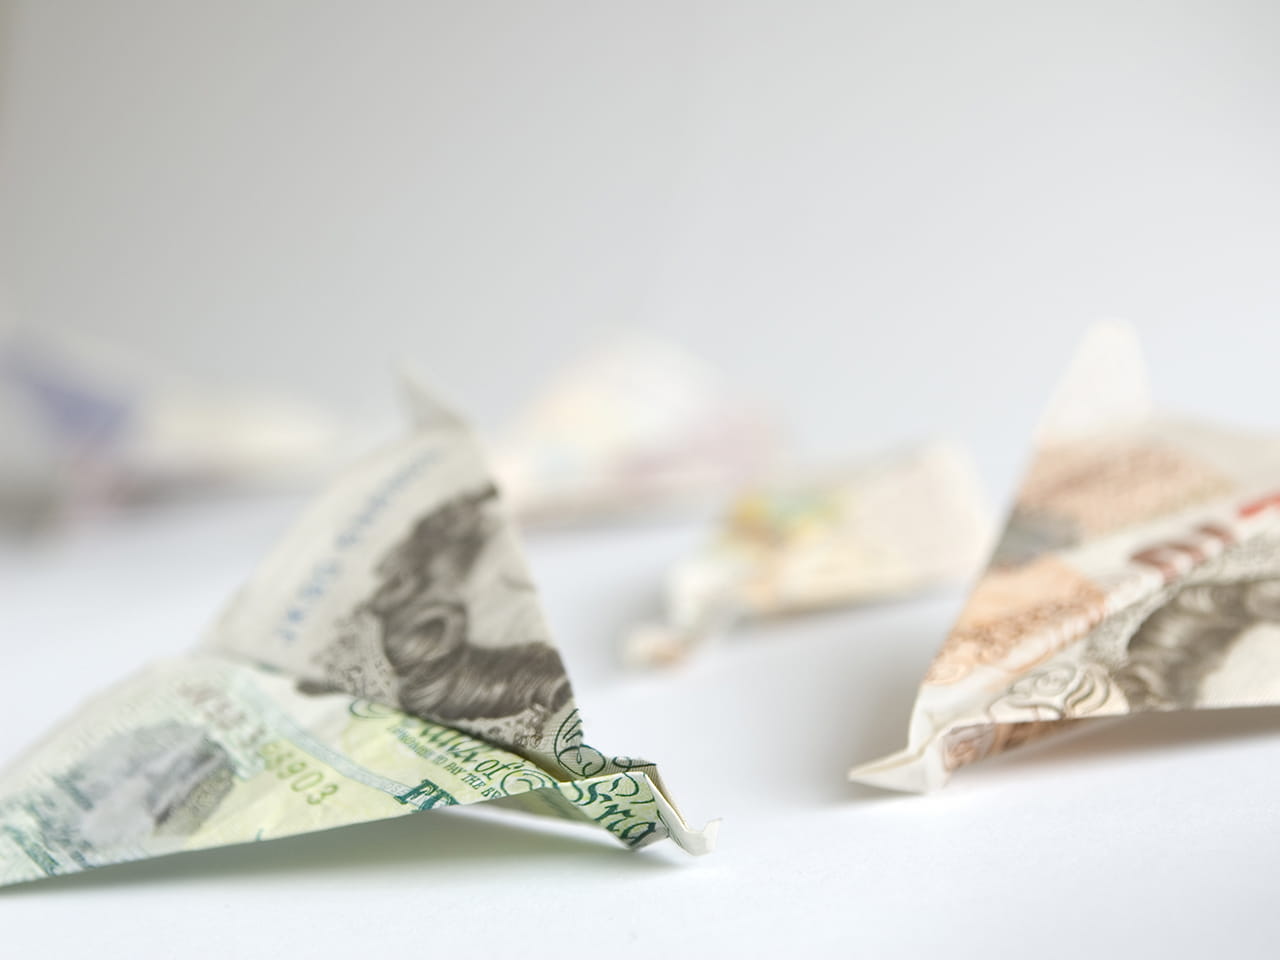 Paper aeroplanes made of bank notes to represent wasting your money or throwing it away